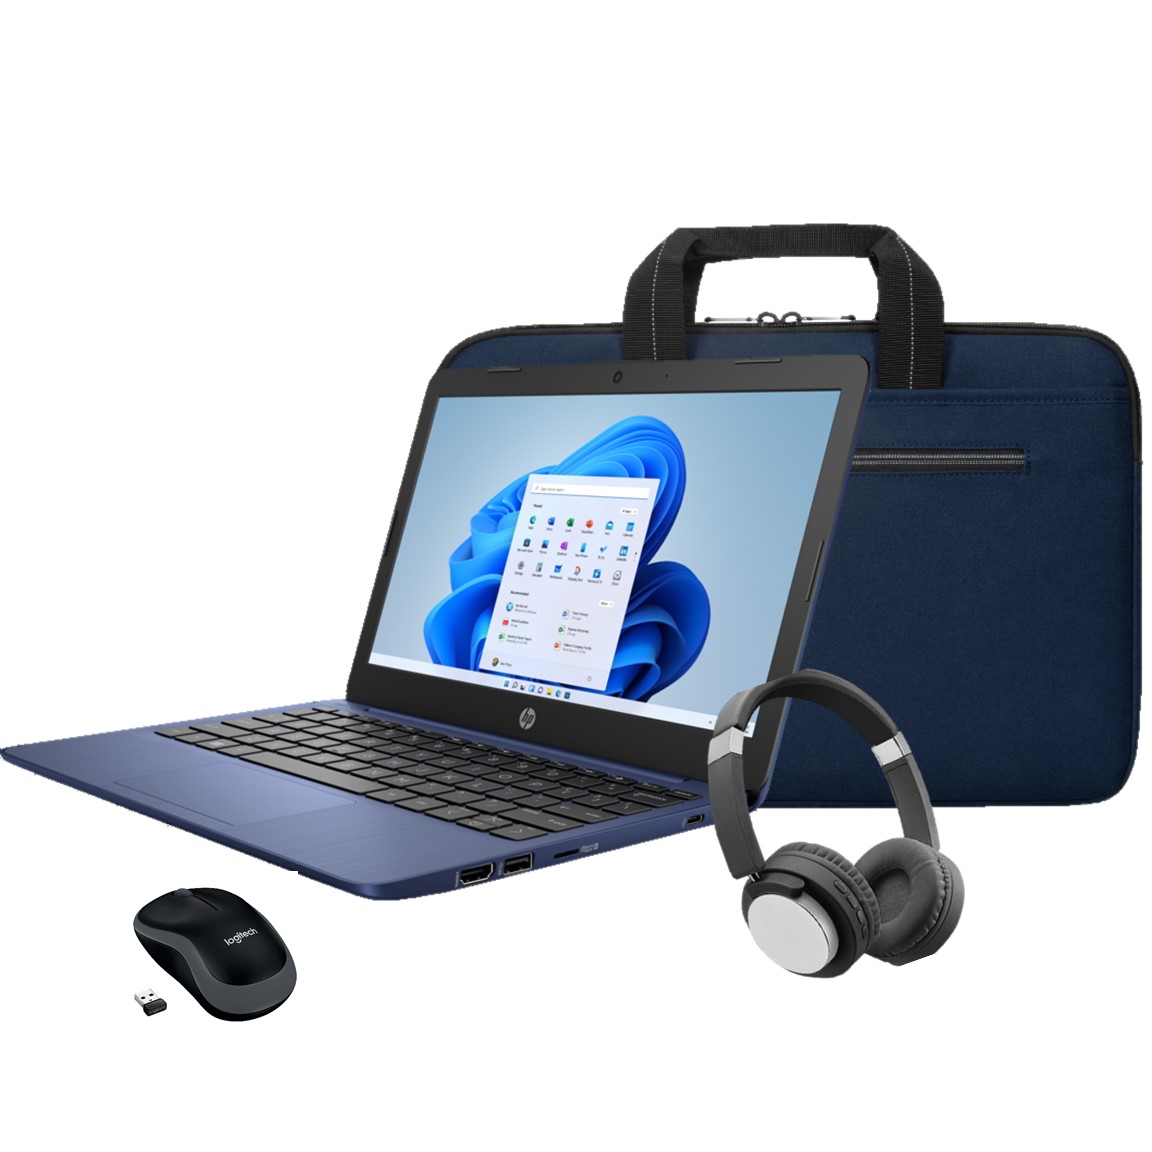 Laptop with Back Headphones and Mouse